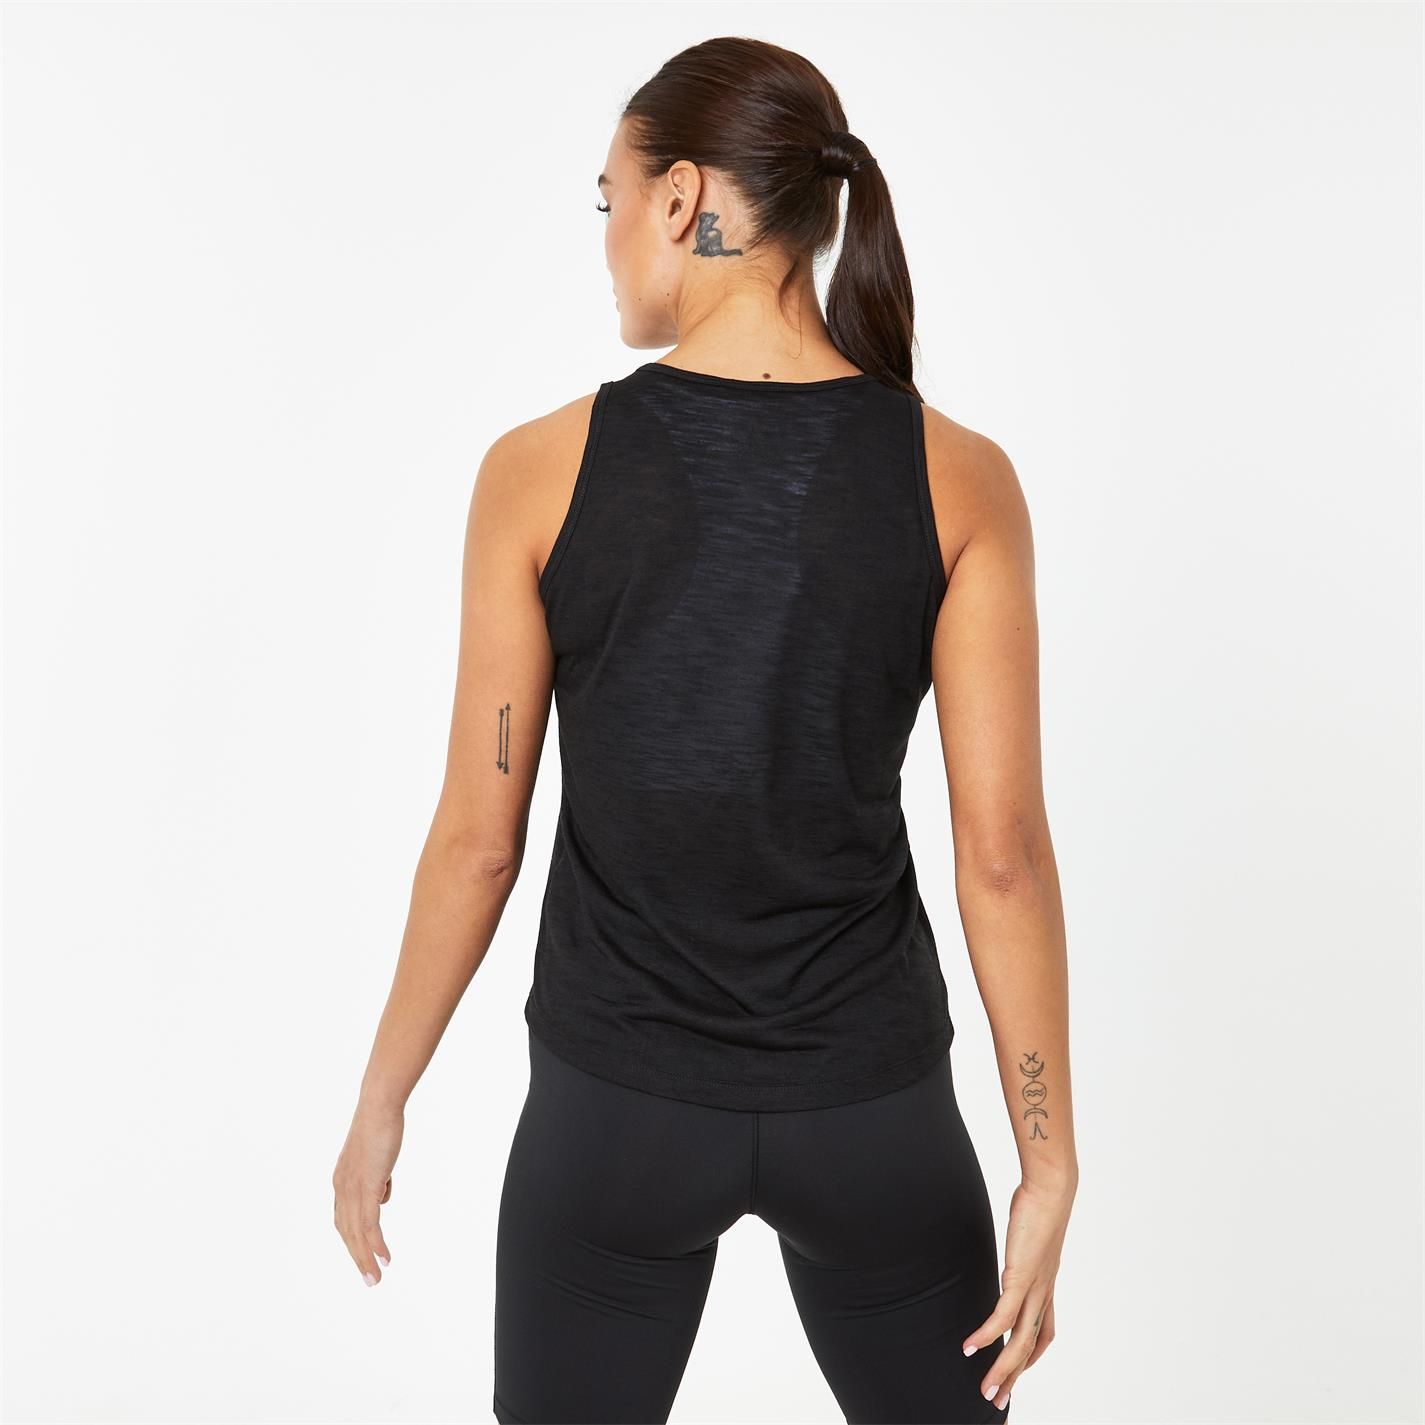 LA Gear Loose Vest - This Ladies LA Gear loose vest is the perfect addition to your activewear. It is crafted from a soft polyester/ elastane blend ensuring that has stretch soft construction, as well as being durable. Mesh panelling on the straps promote airflow, and the look is completed with printed LA Gear branding.  > Loose fit > Two straps > Dropped back > Soft construction > Mesh panelling > Stretch > Curved hemline > Printed LA Gear branding > 88% Polyester, 12% Elastane > Machine Washable > Keep Away From Fire